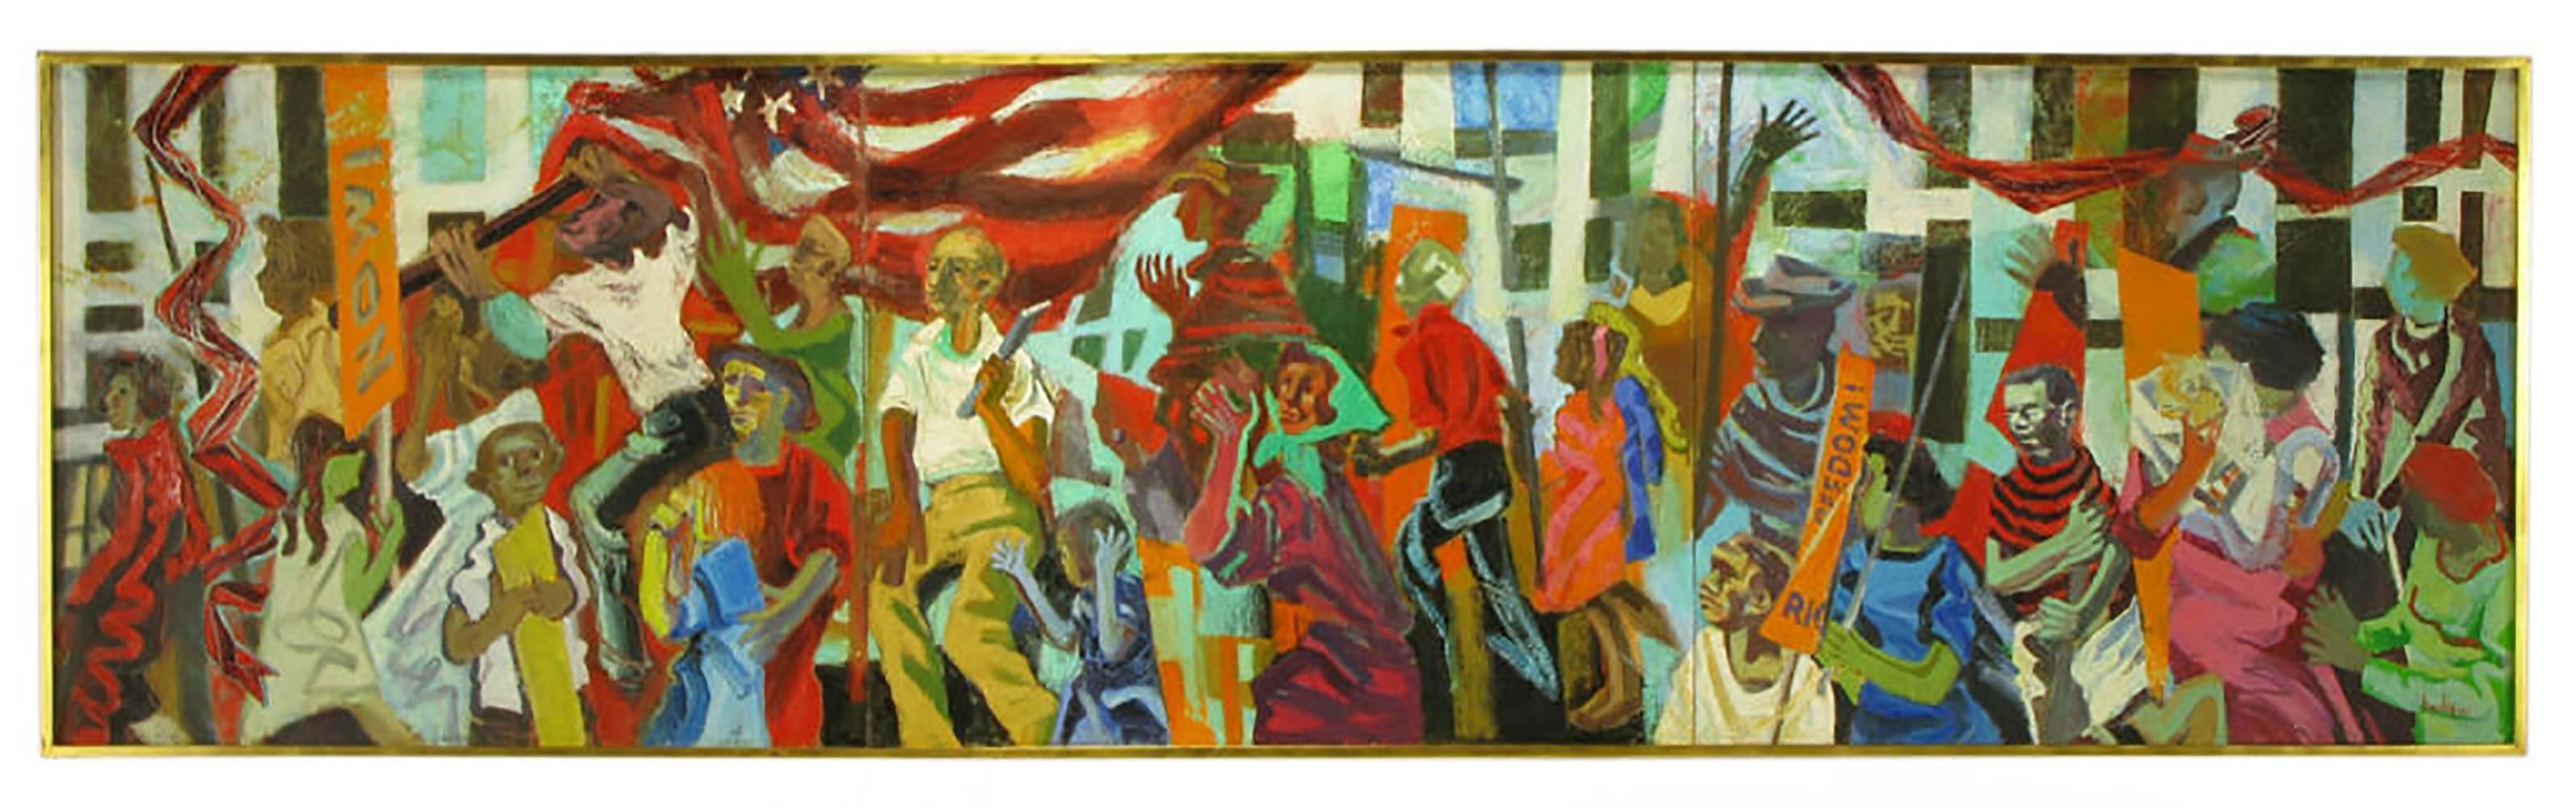 Oil on canvas triptych of the watershed 1963 March on Washington, by DC area artist Joan Miller Linsley (1922-2000). Entitled 